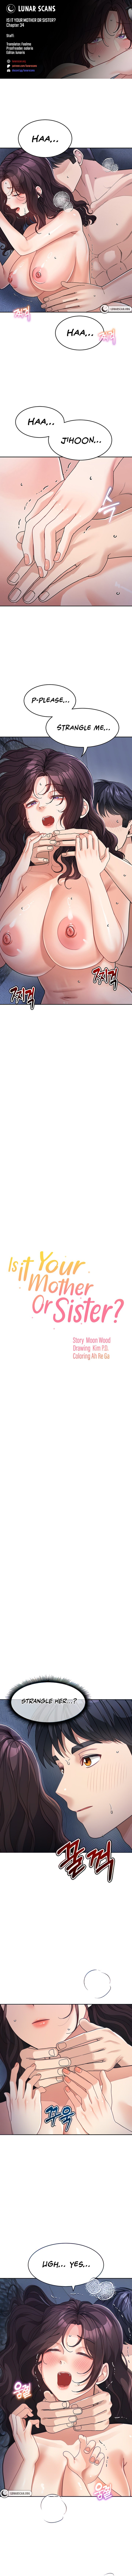 Is It Your Mother or Sister? - Chapter 34 Page 1